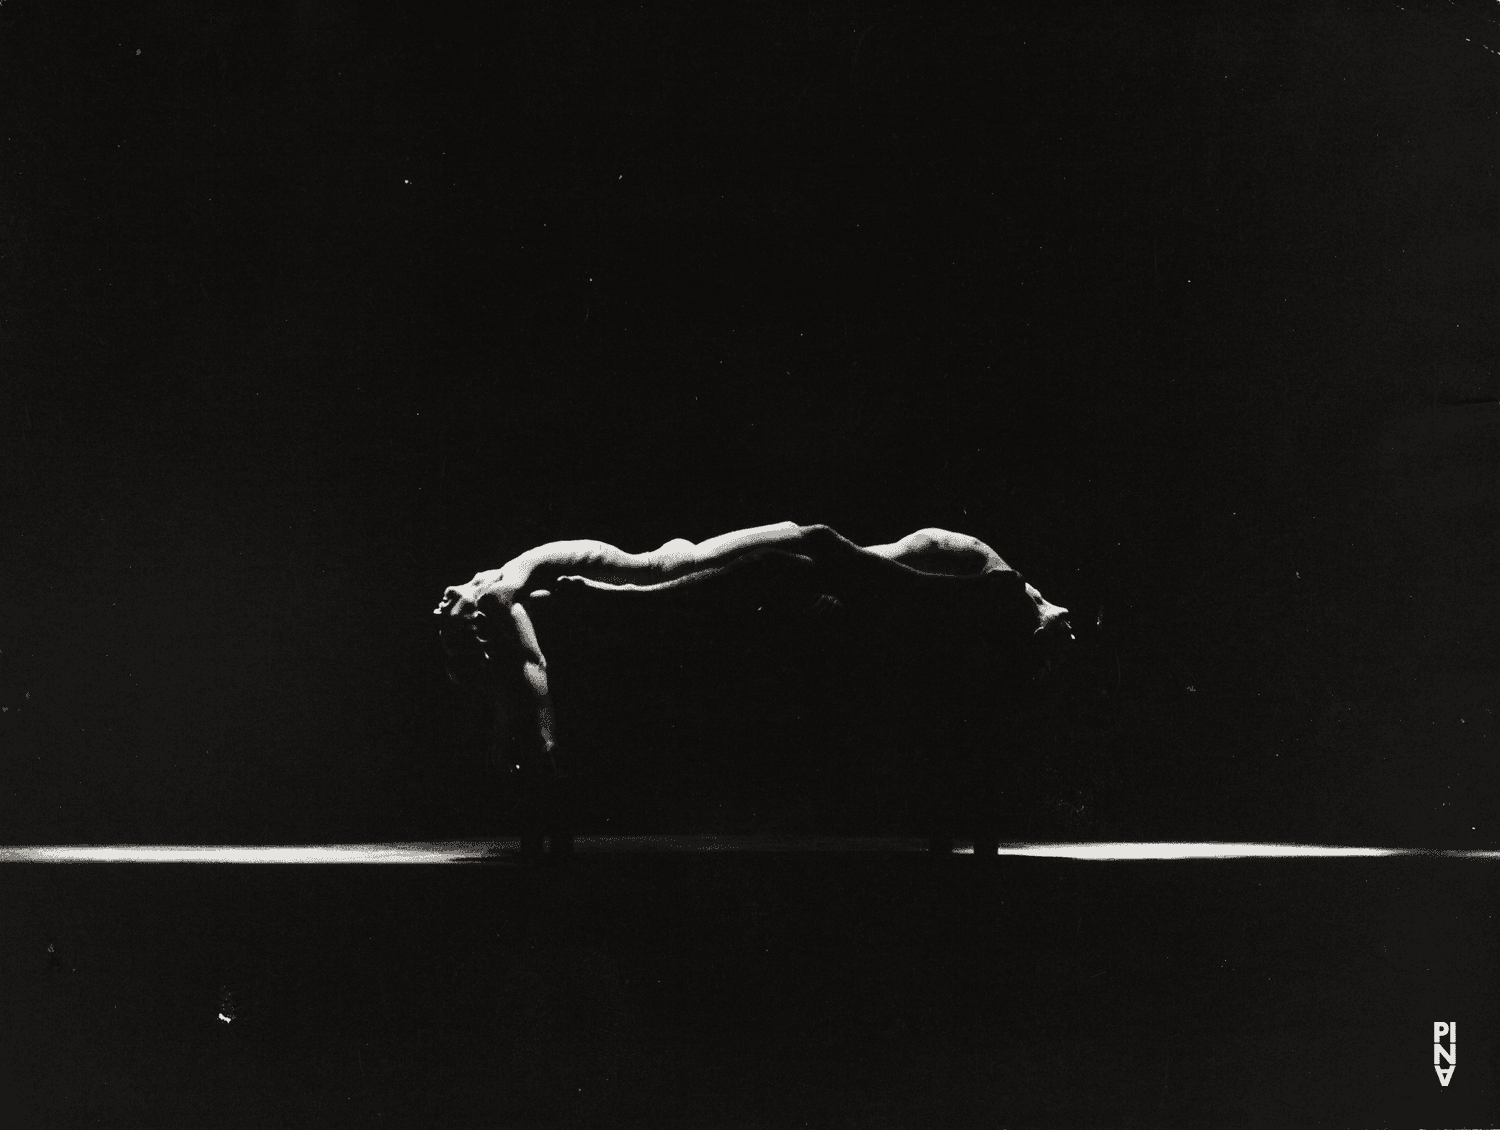 Ed Kortlandt and Dominique Mercy in “Iphigenie auf Tauris” by Pina Bausch at Opernhaus Wuppertal, April 20, 1974